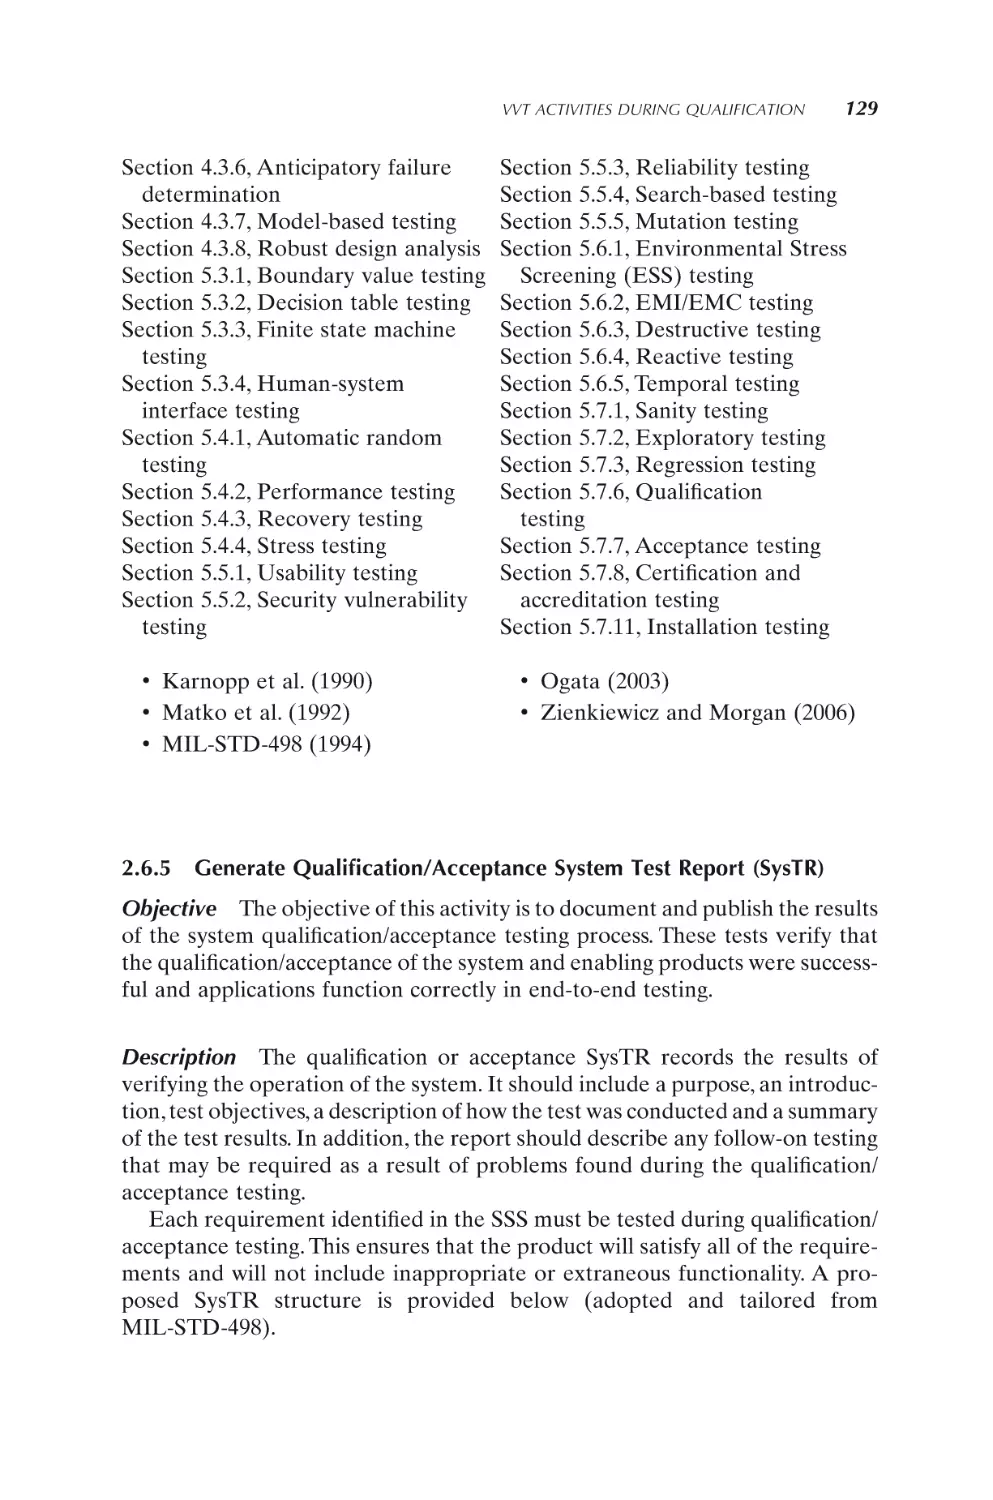 2.6.5 Generate Qualification/Acceptance System Test Report (SysTR)